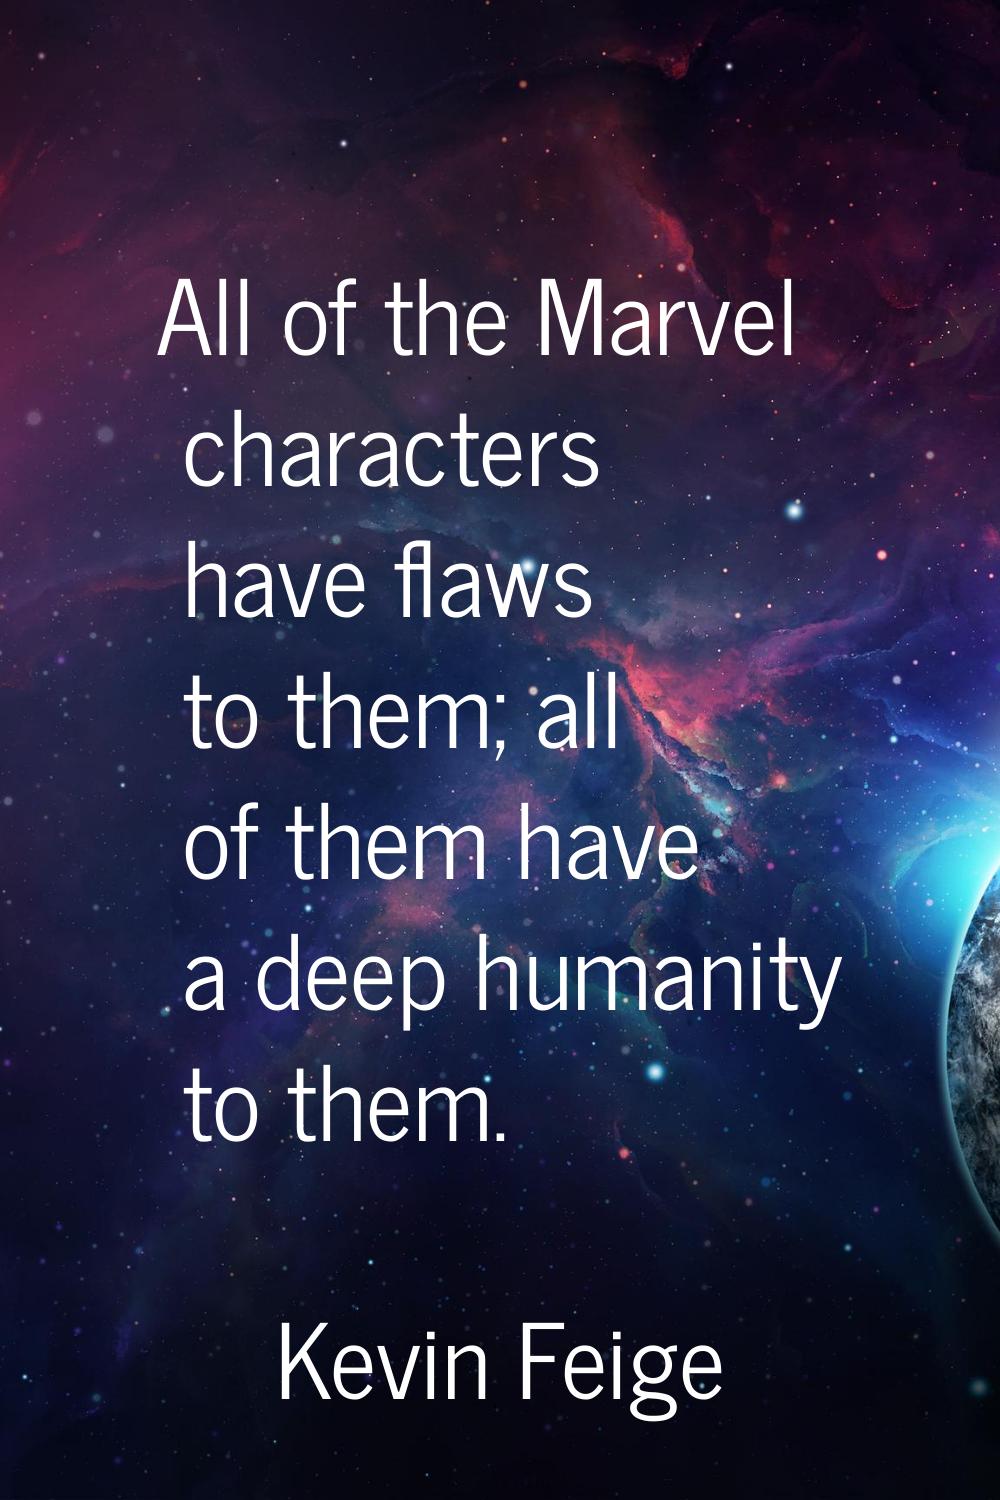 All of the Marvel characters have flaws to them; all of them have a deep humanity to them.